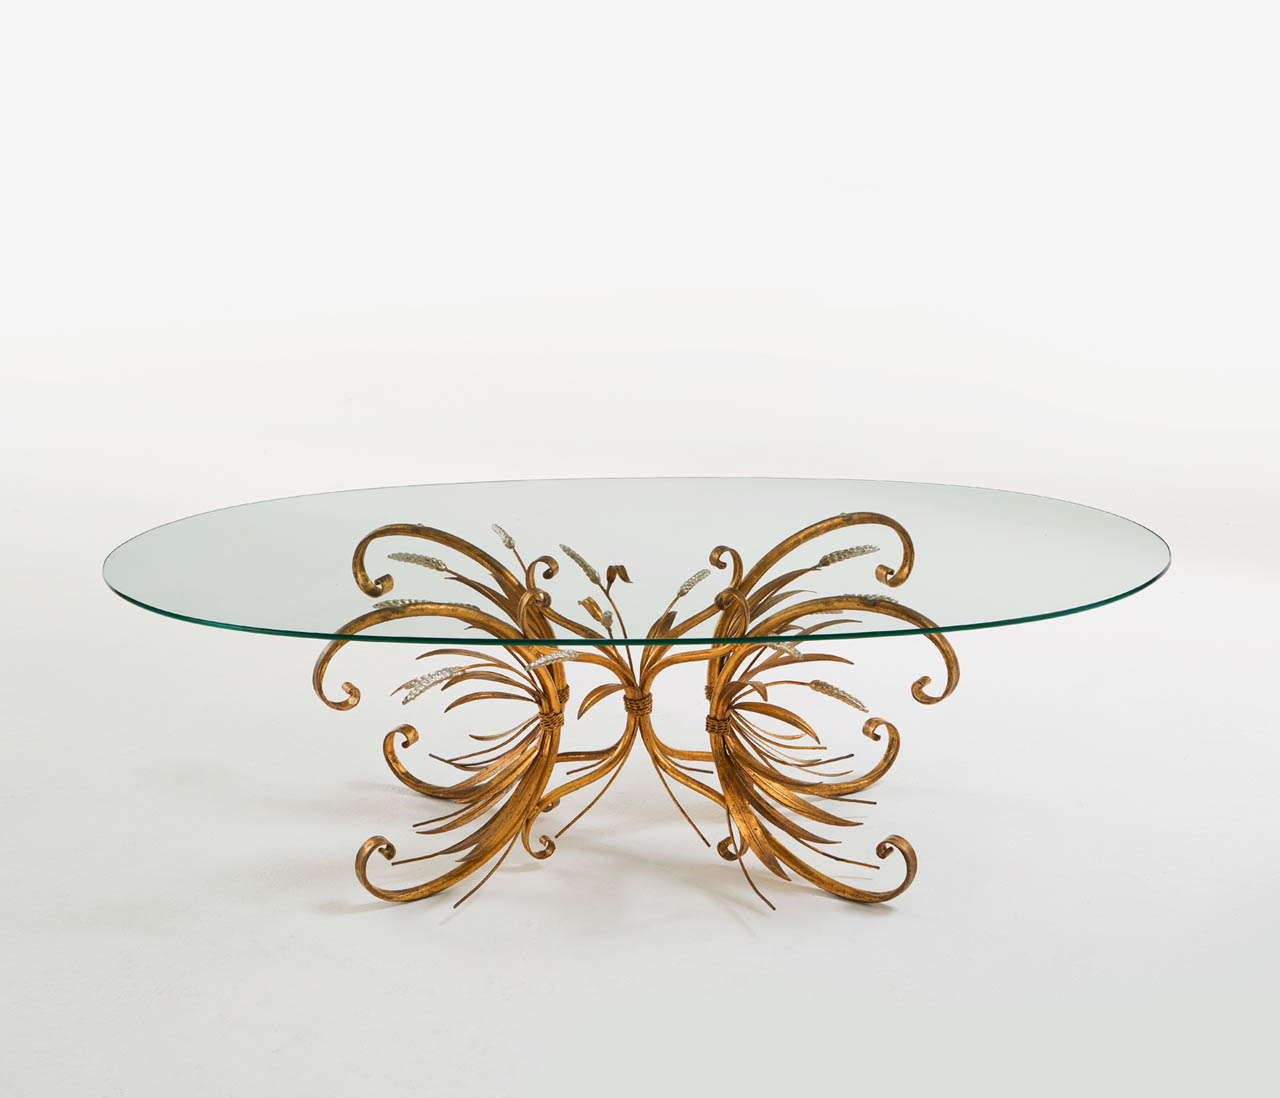 Cocktail table, glass, brass, France, ca. 1950

This wheat sheaf side or coffee table is decorative and has a French origin. The frame holds a patina to the brass surface and the silver finished wheat tops. The table comes  with an oval glass top.
